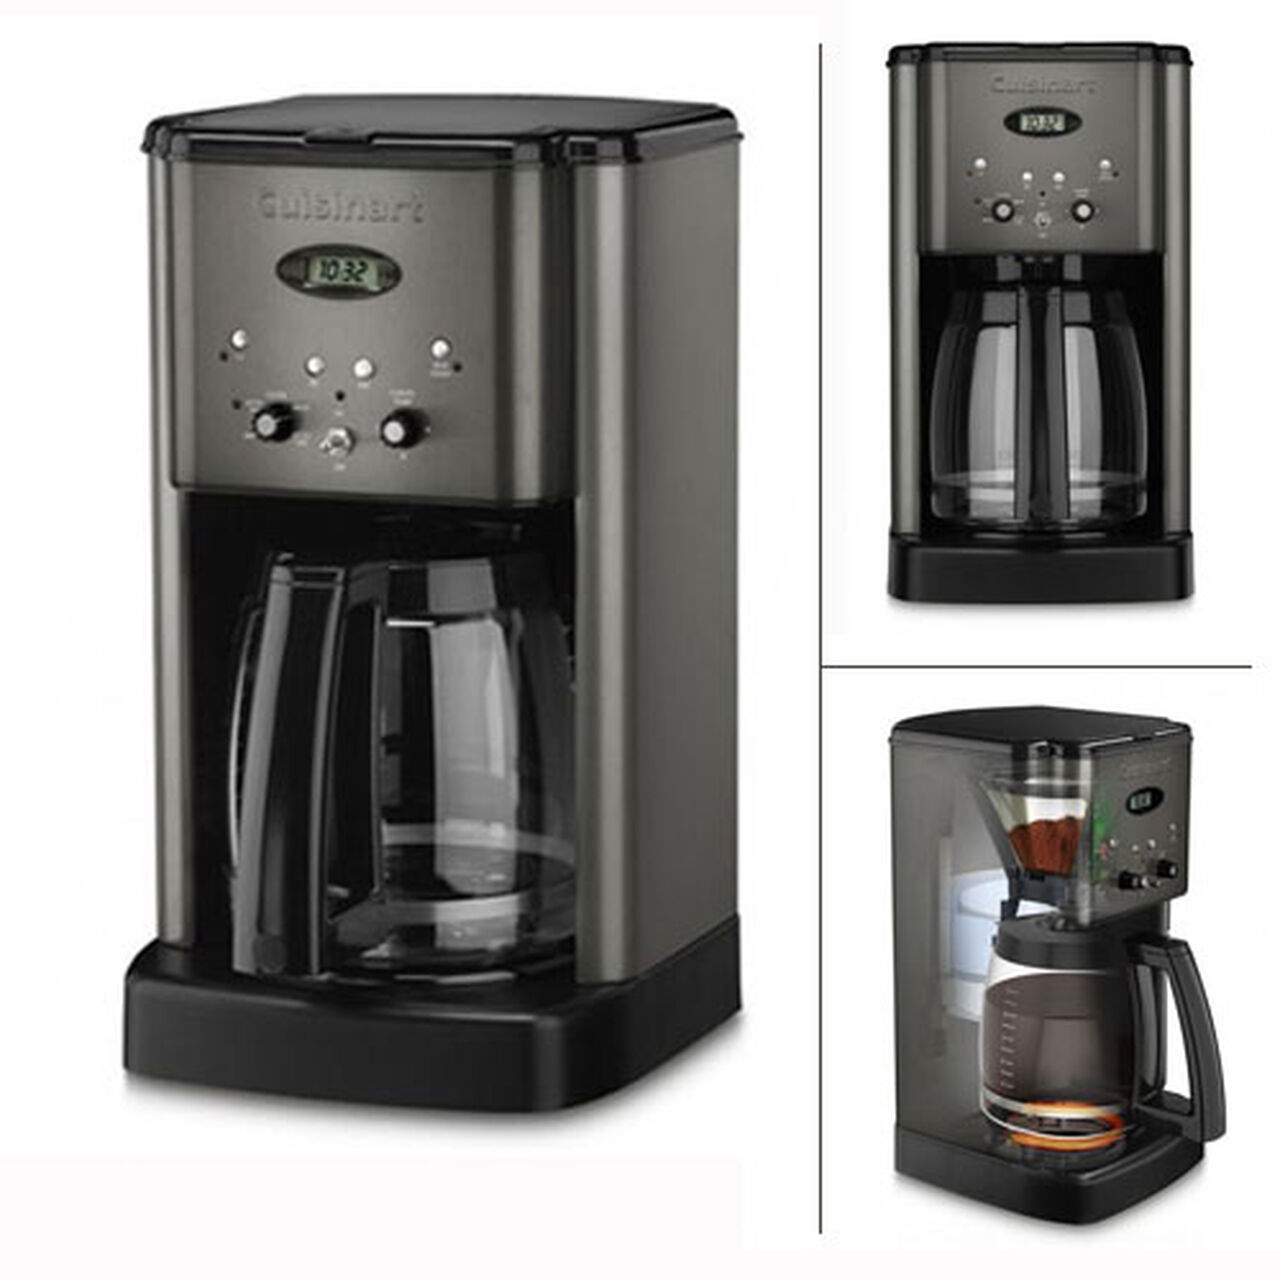 CUISINART BREW CENTRAL 12-CUP PROGRAMMABLE COFFEE MAKER WITH